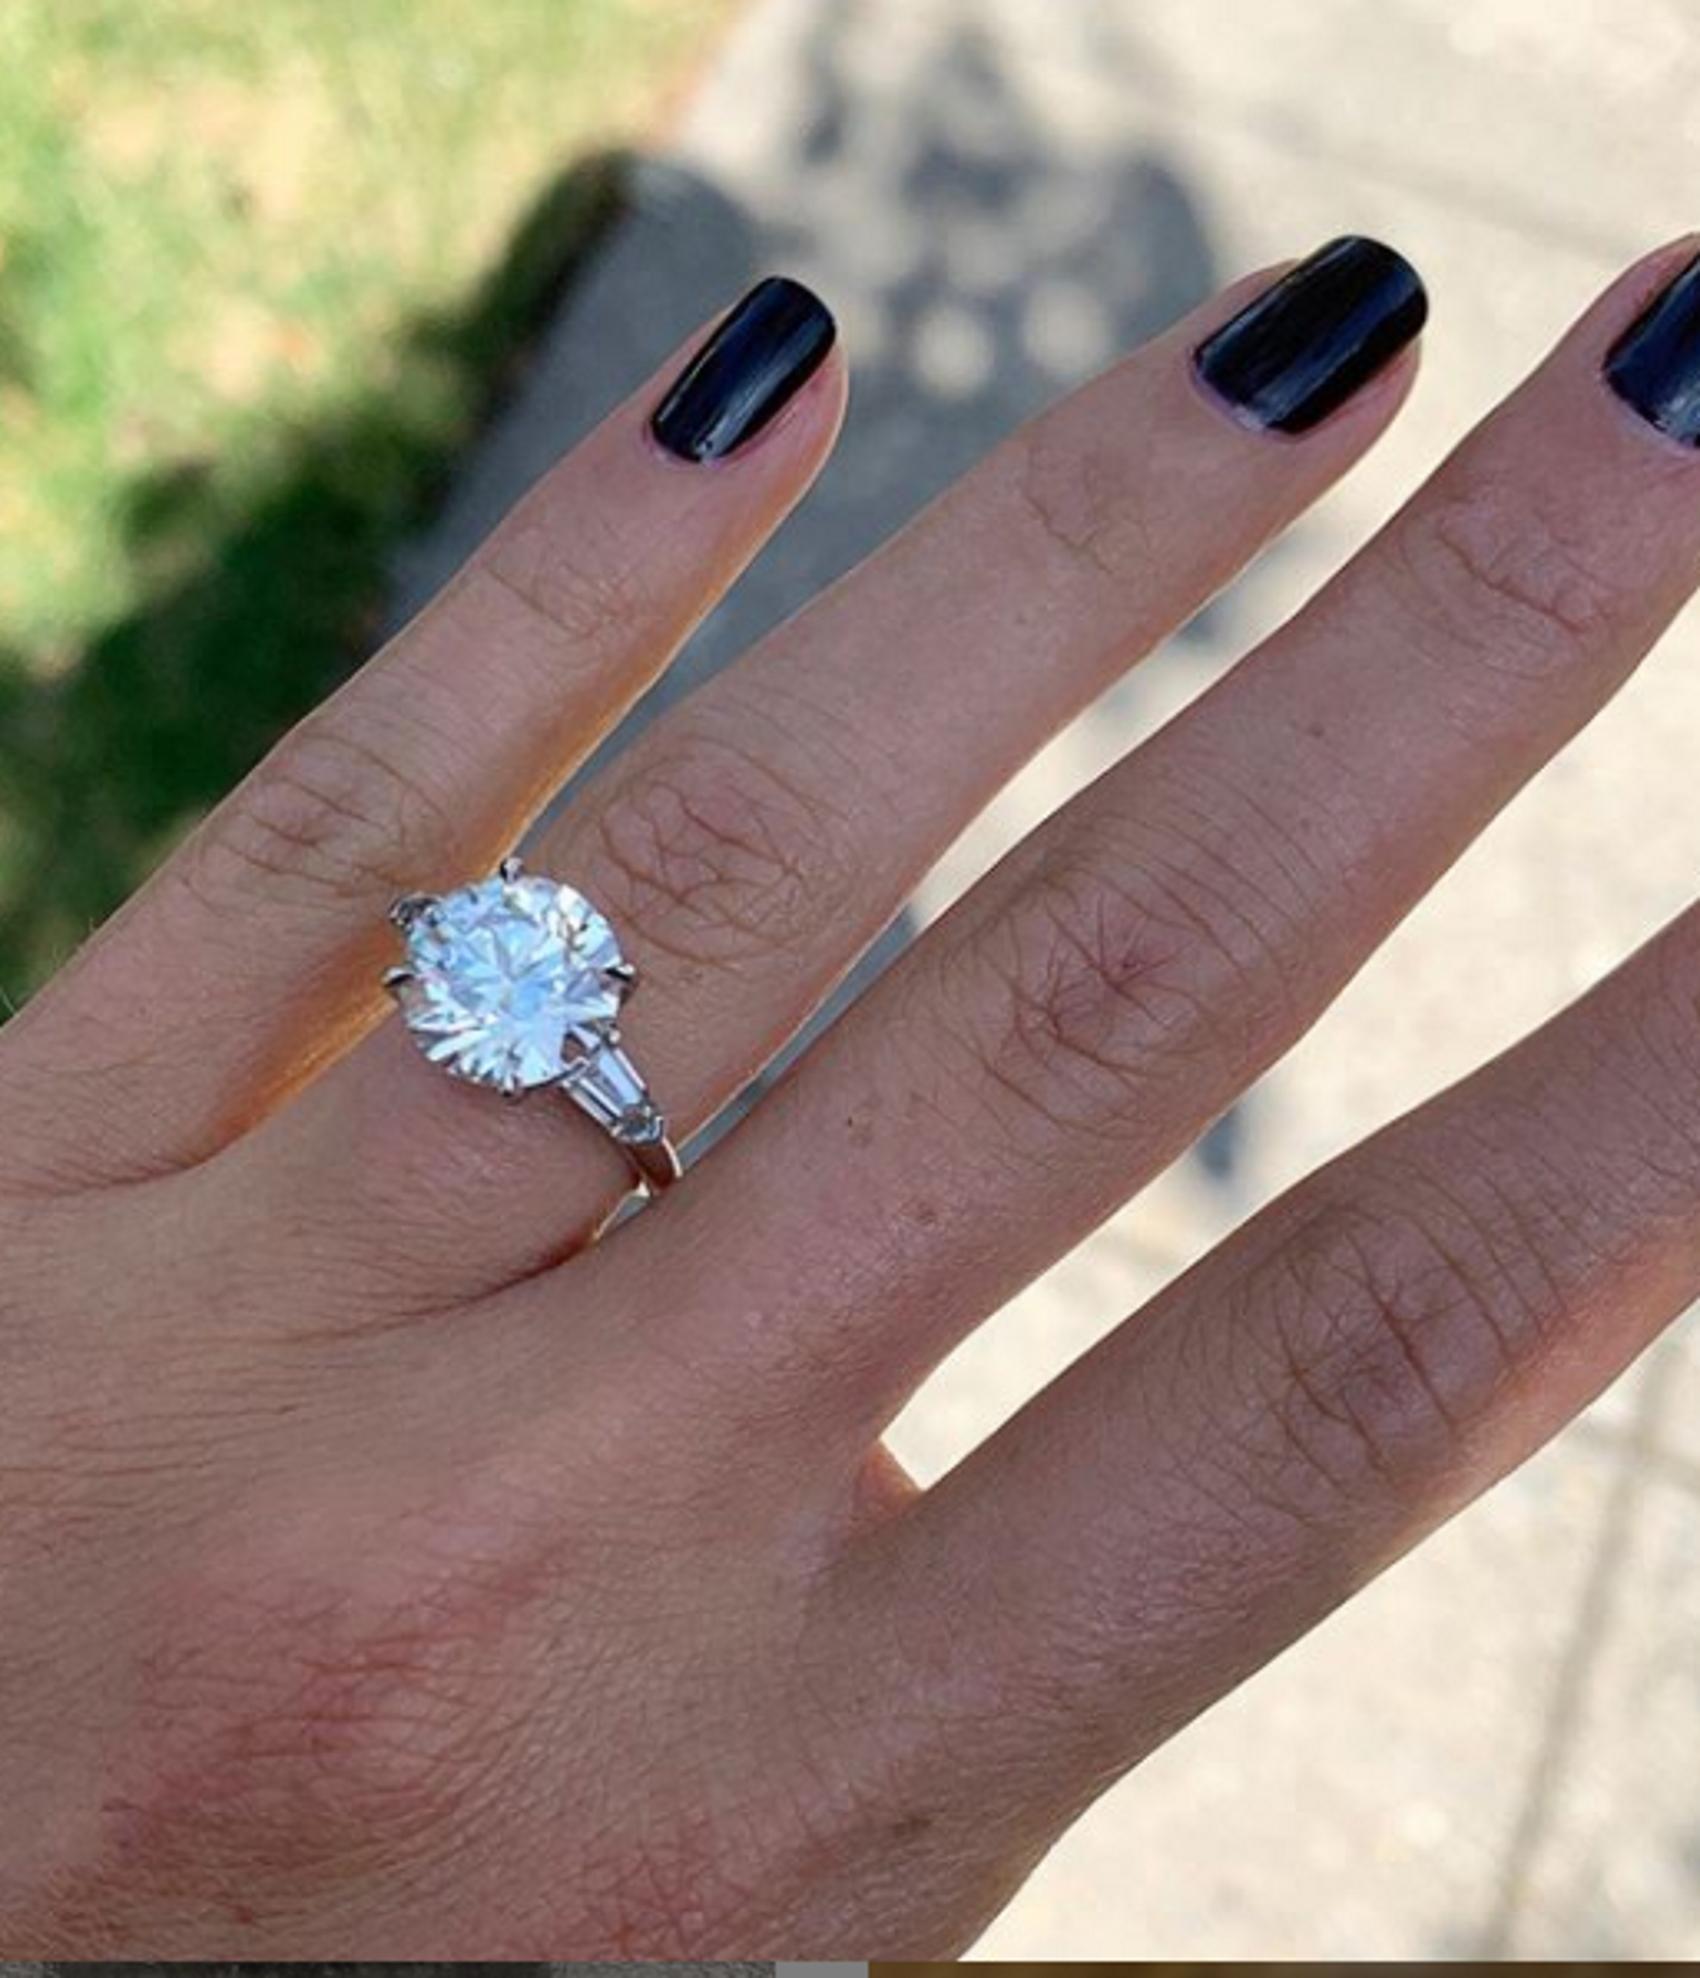 Gorgeous 5 carat Gia certified triple excellent diamond ring is beautifully white, 100% eye clean, and displays absolutely phenomenal sparkle! This diamond was hand selected because it is completely eye clean, proper k color without any undertones